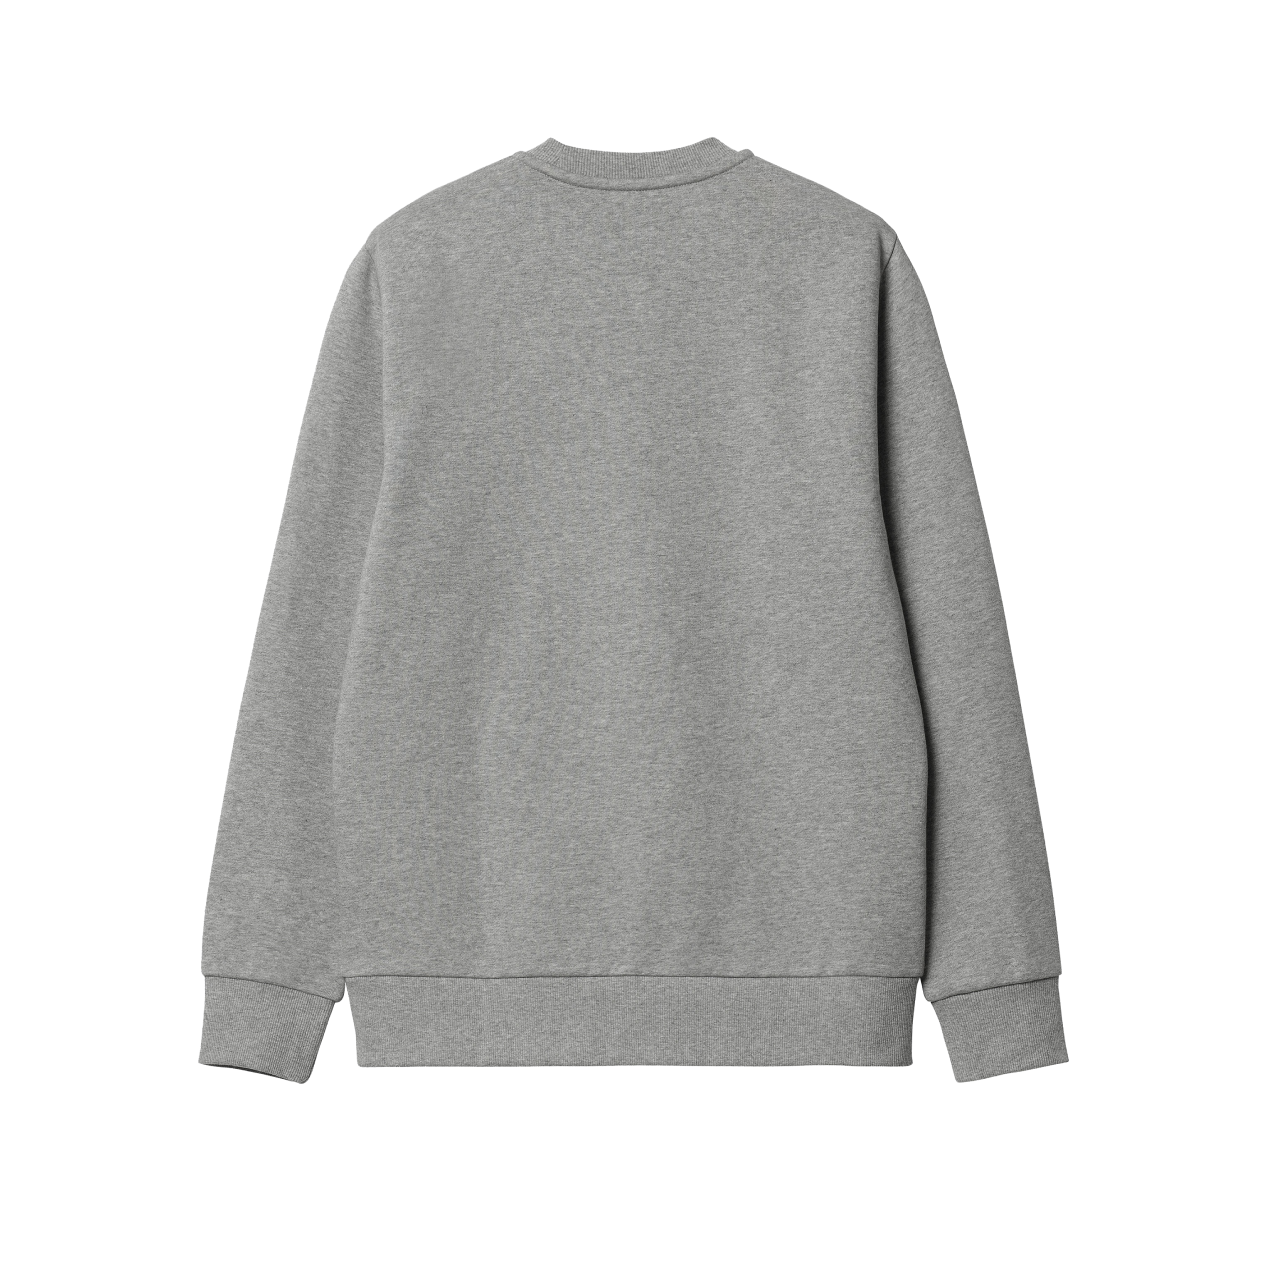 Guide To Parenting Classic Heather Grey Sweatshirt